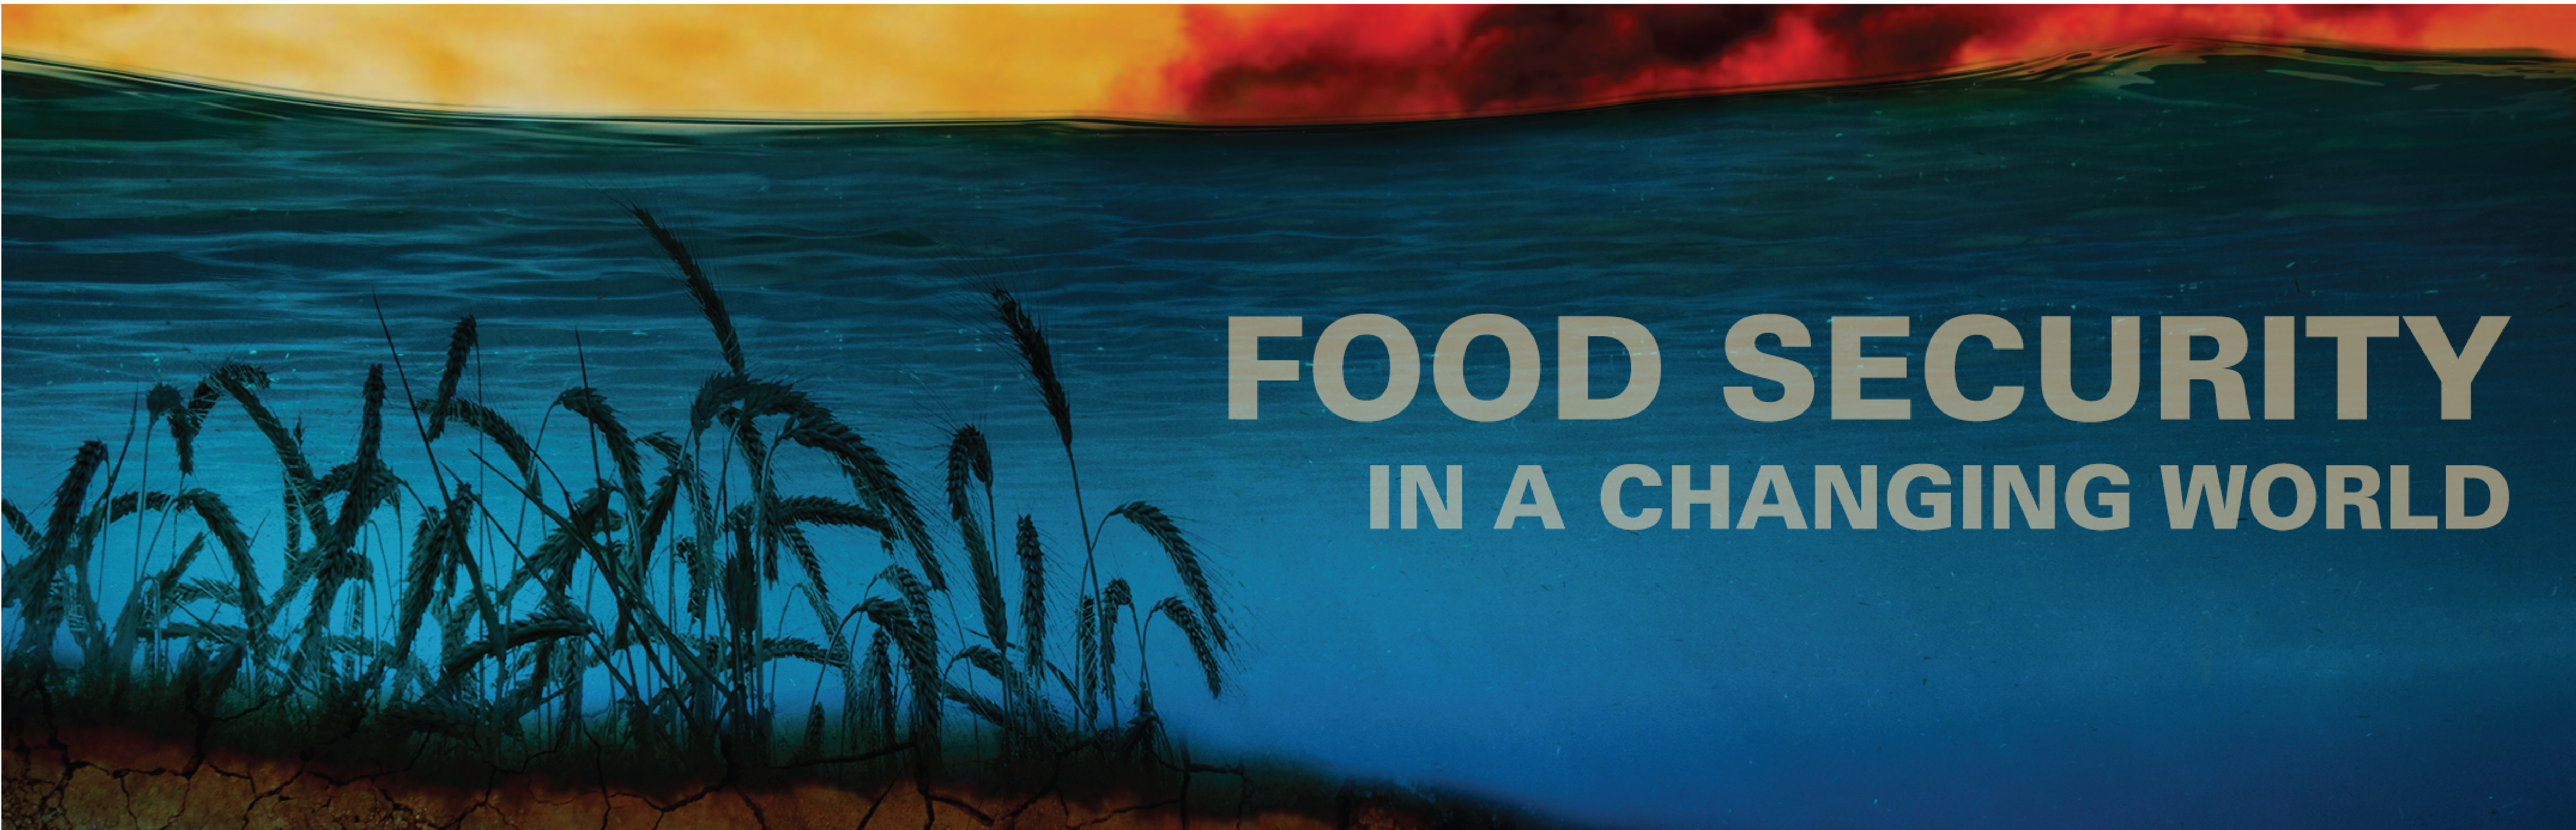 Artwork for Food Security in a Changing World